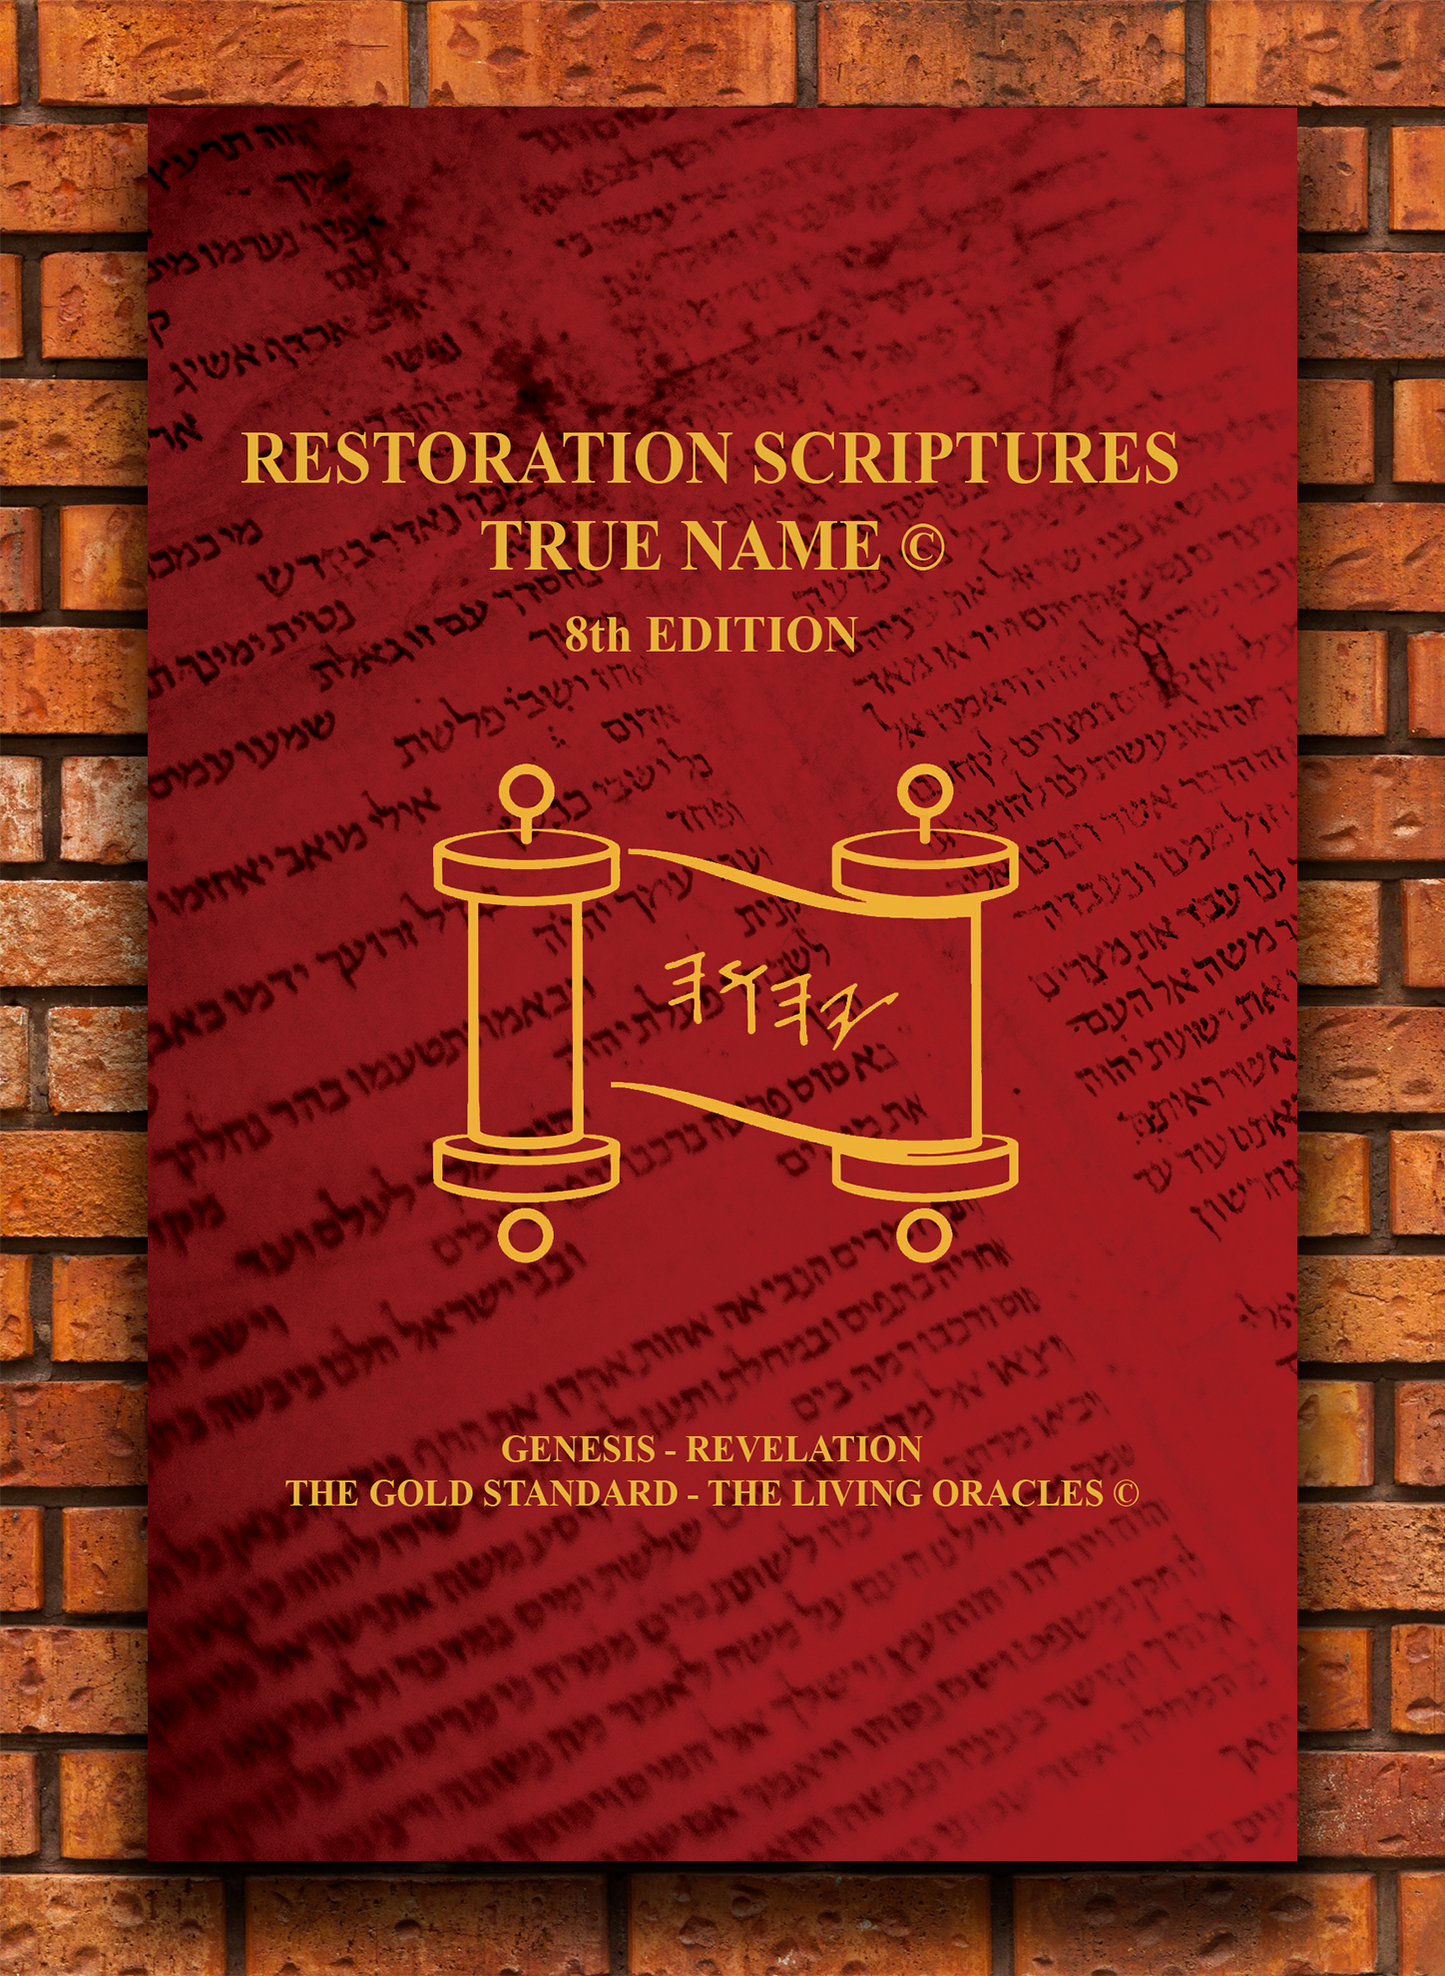 FIVE ALIVE SPECIAL The Restoration Scriptures True Name Eighth Edition - Genesis-Revelation